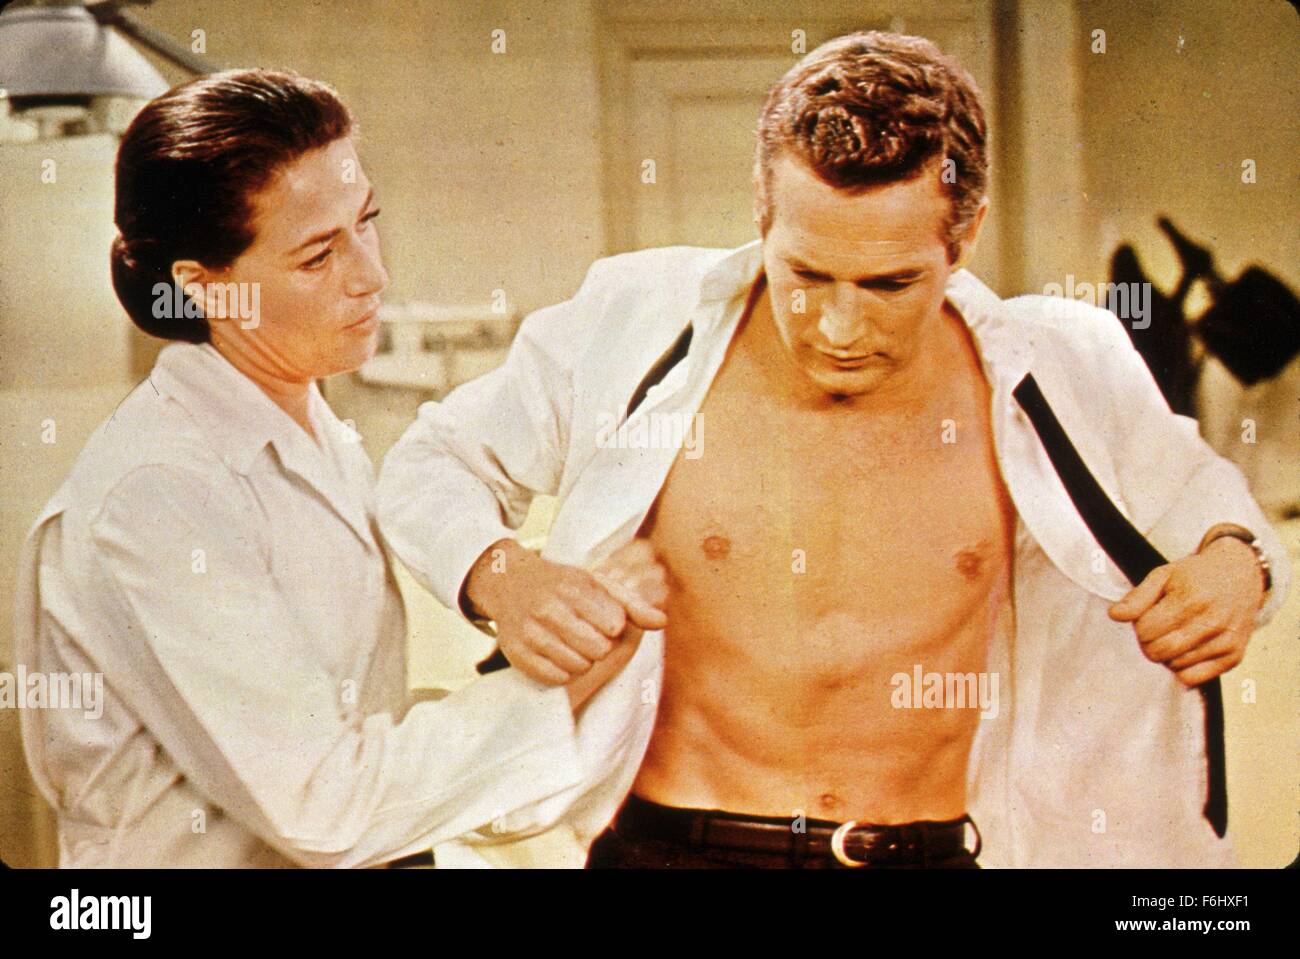 1966, Film Title: TORN CURTAIN, Director: ALFRED HITCHCOCK, Studio: UNIVERSAL, Pictured: ESPIONAGE (INVOLVING SECRETS), GISELA FISCHER, ALFRED HITCHCOCK, PAUL NEWMAN, POLITICAL (INTRIGUE/CORRUPTION. (Credit Image: SNAP) Stock Photo